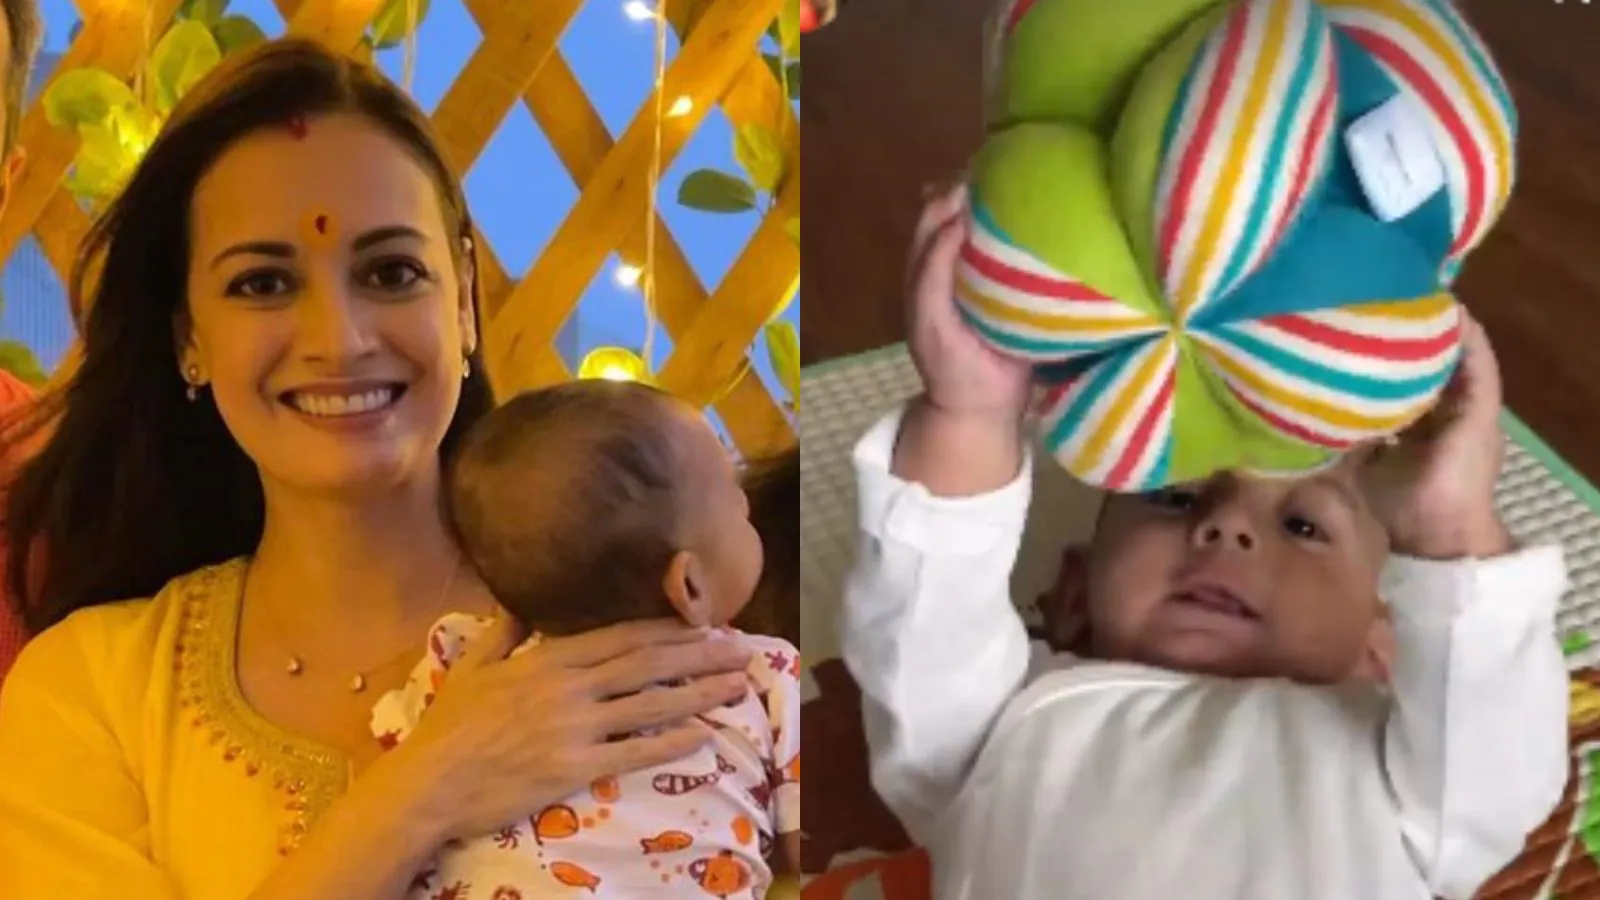 Dia Mirza Gives a Glimpse of Son Avyaan's Face in New Peek-a-boo Video on Instagram